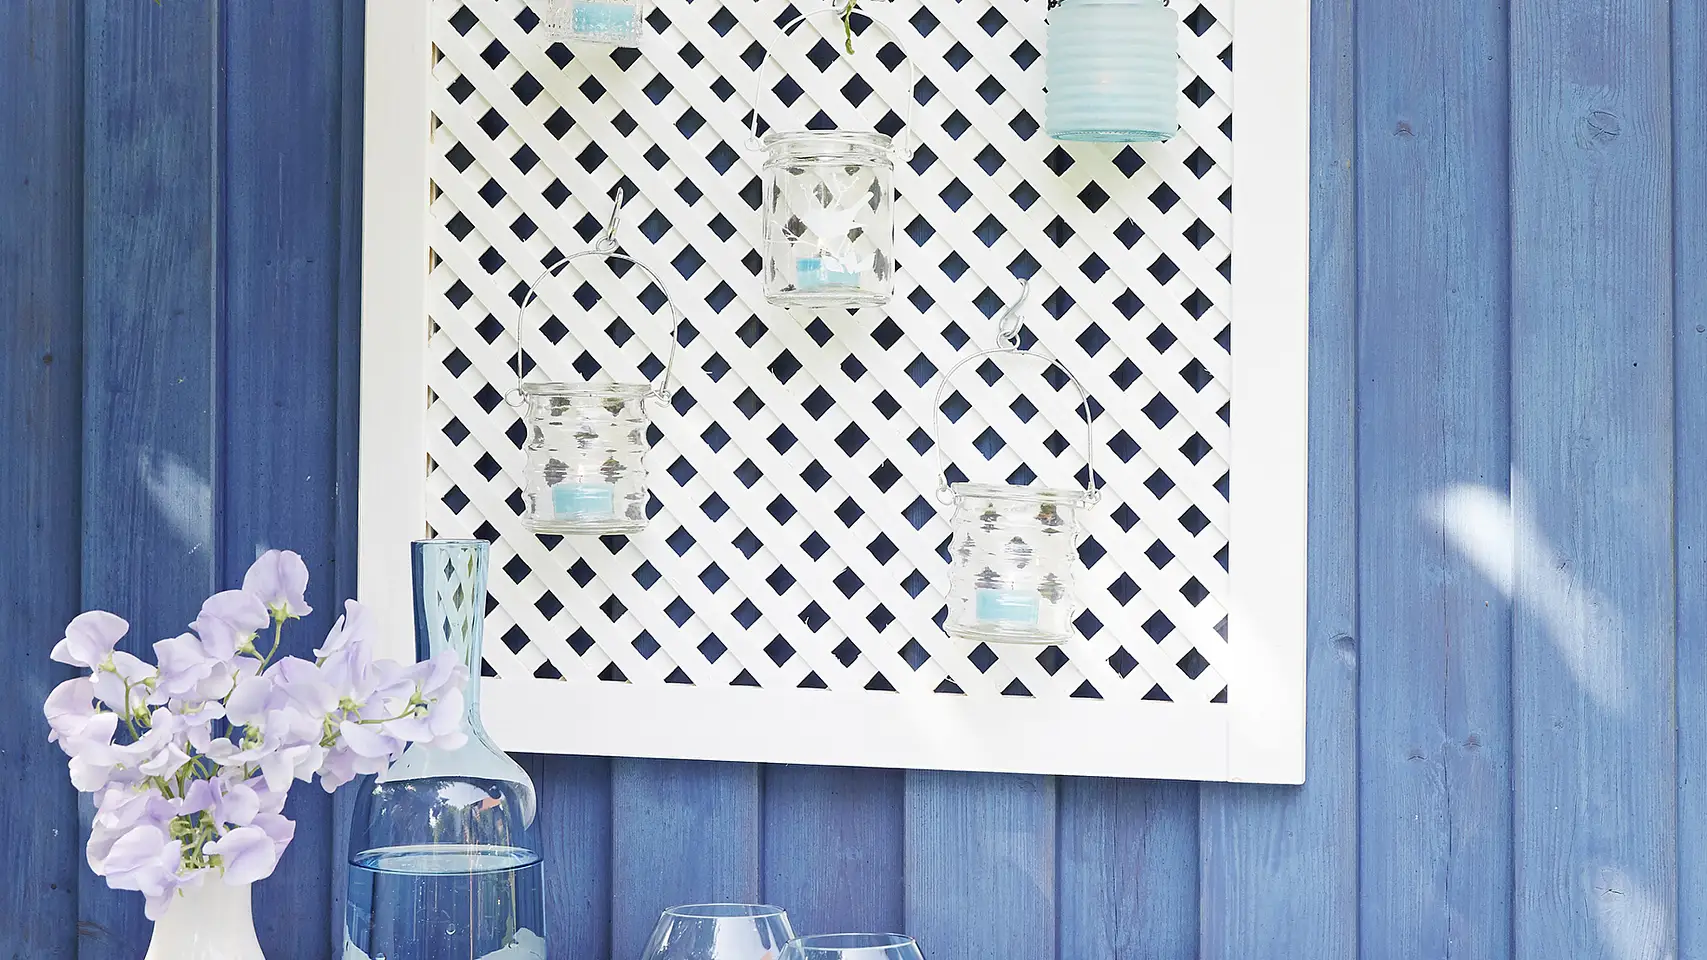 A simple lattice screen door can be transformed into a flower pot or lantern holder with tesa Powerbond® OUTDOOR and a little bit of imagination. This outdoor tape is weather resistant, making it perfect for garden fixing.